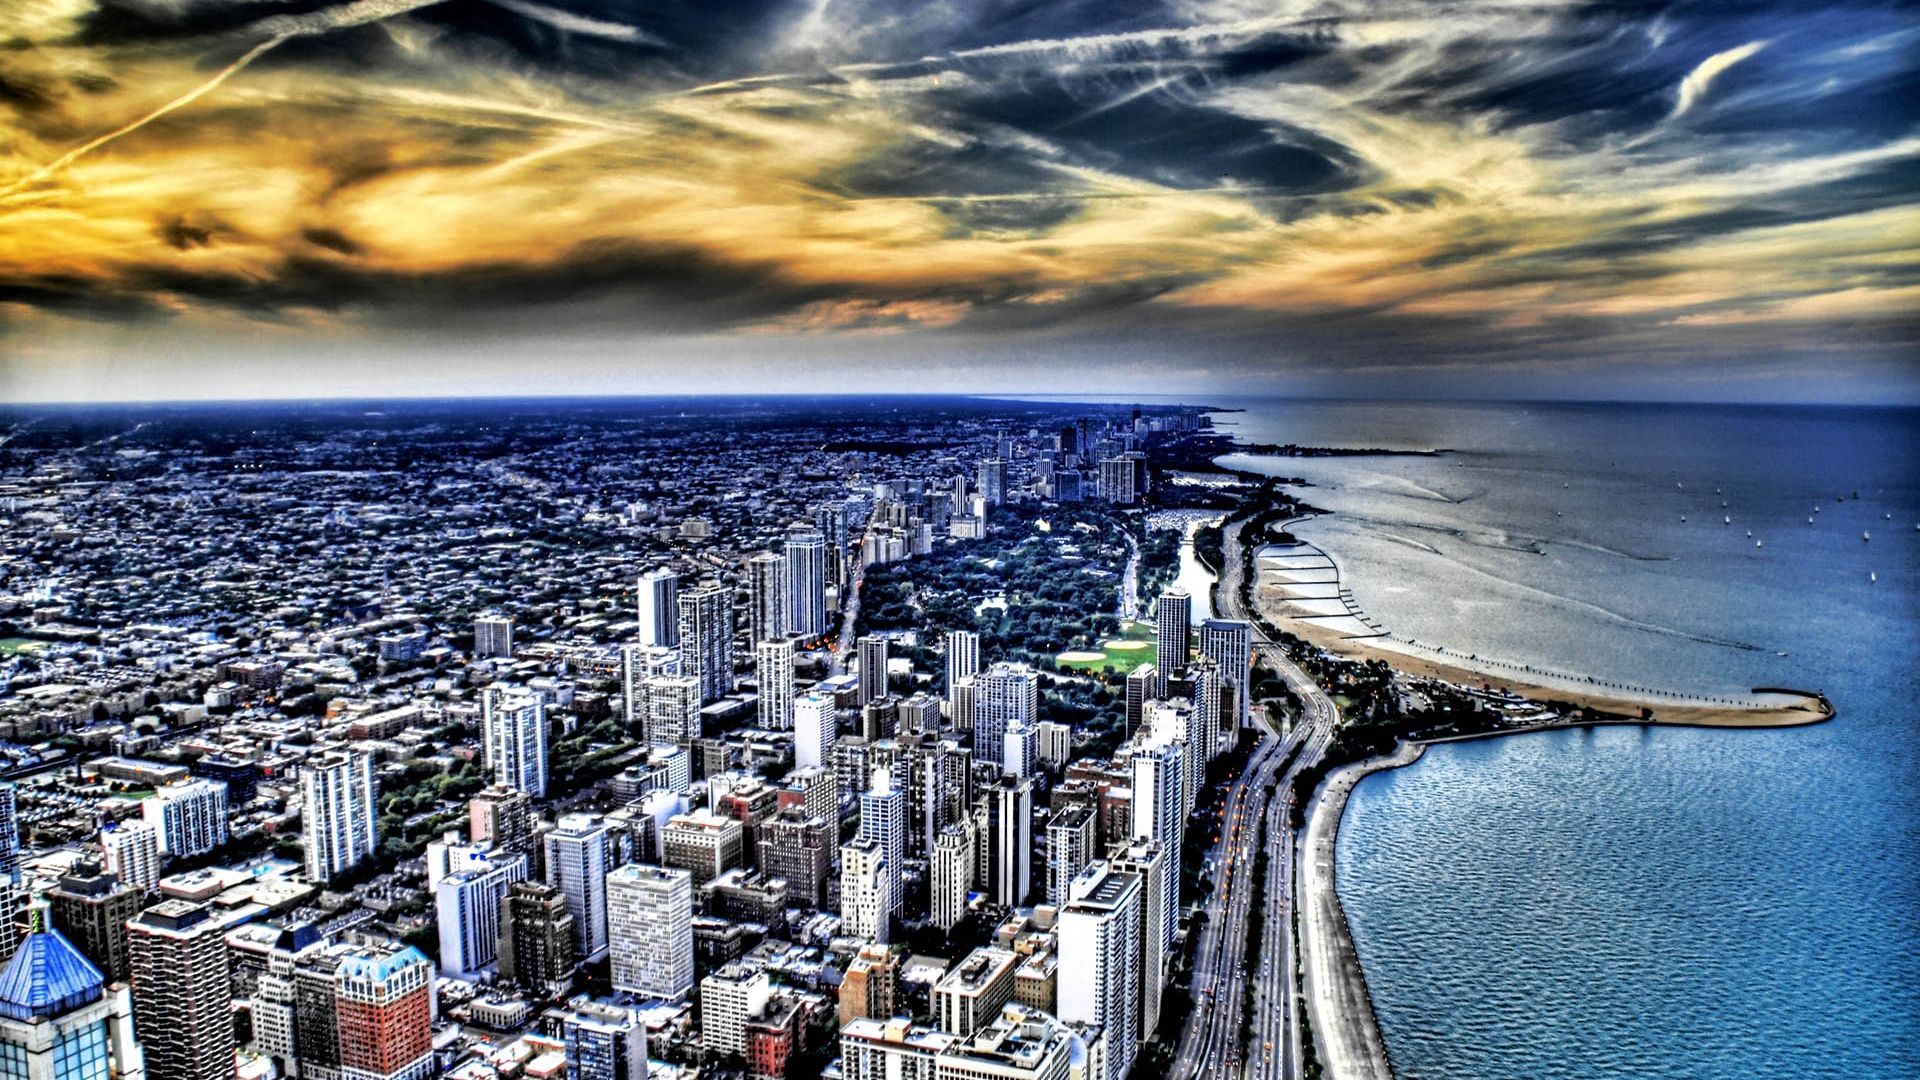 chicago, cities, building, view from above, shore, bank, ocean, skyscrapers, hdr